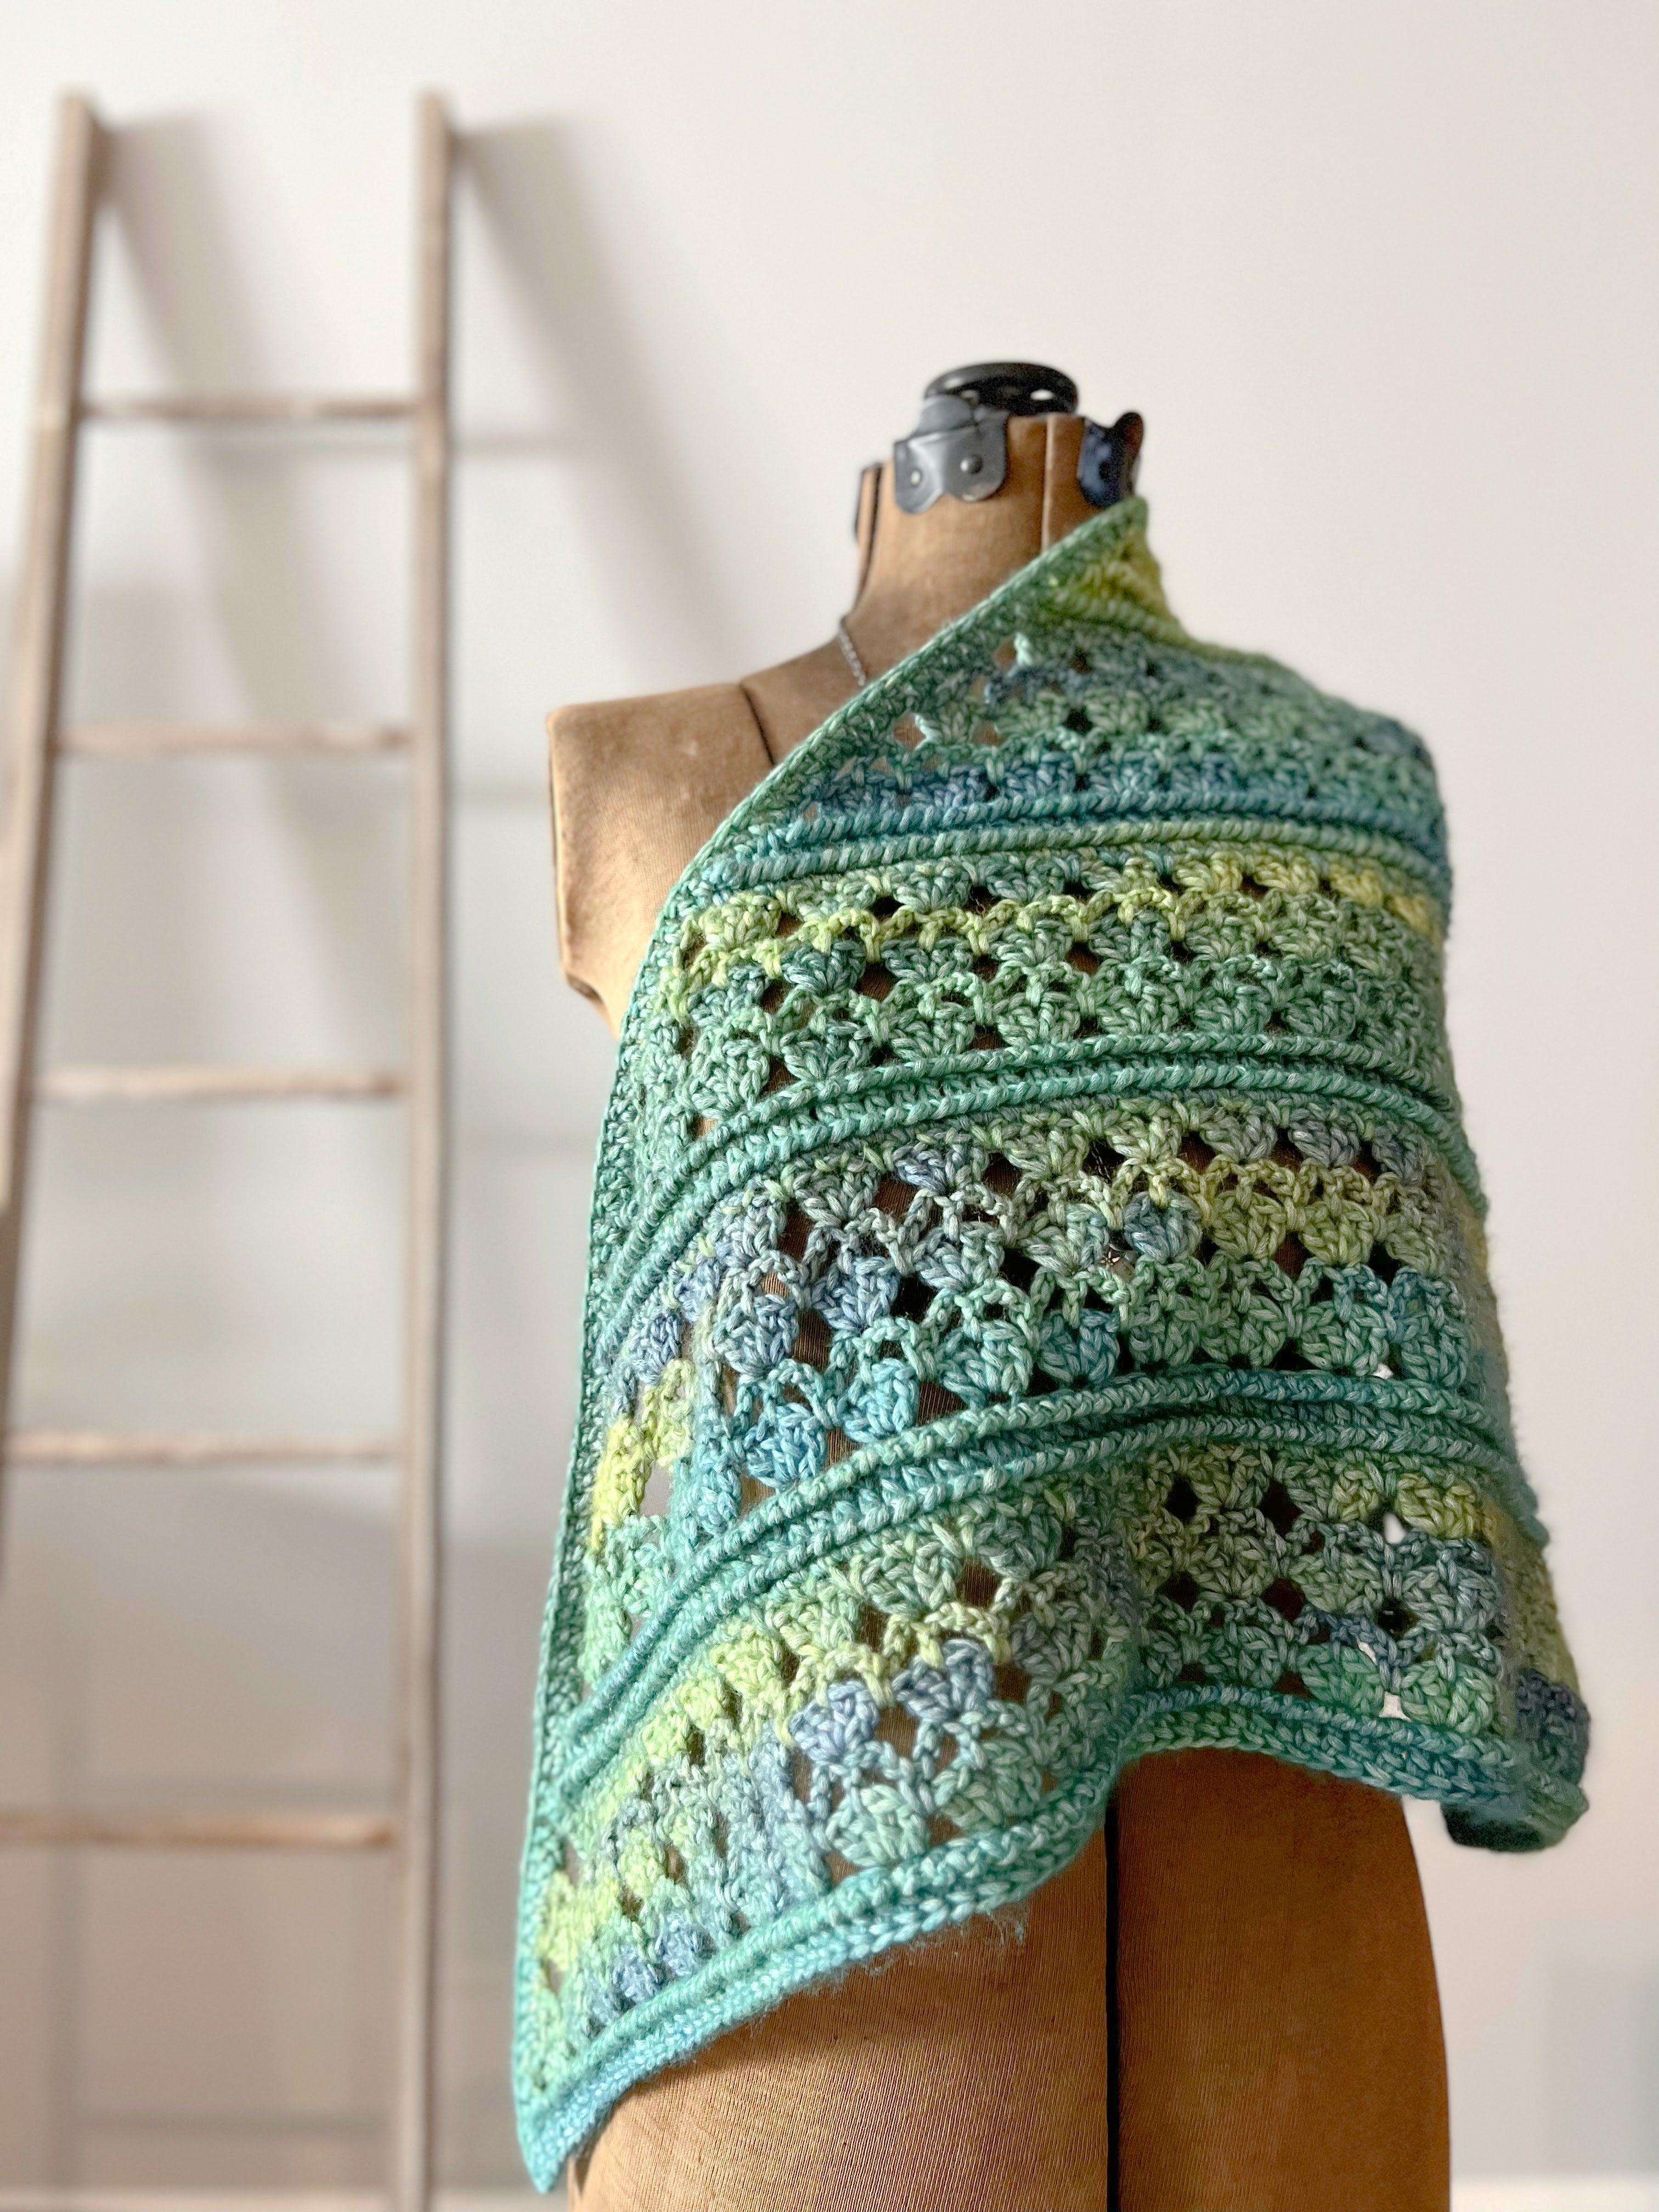 Spring Blooms in Yarn: The Caron Blossom Cakes